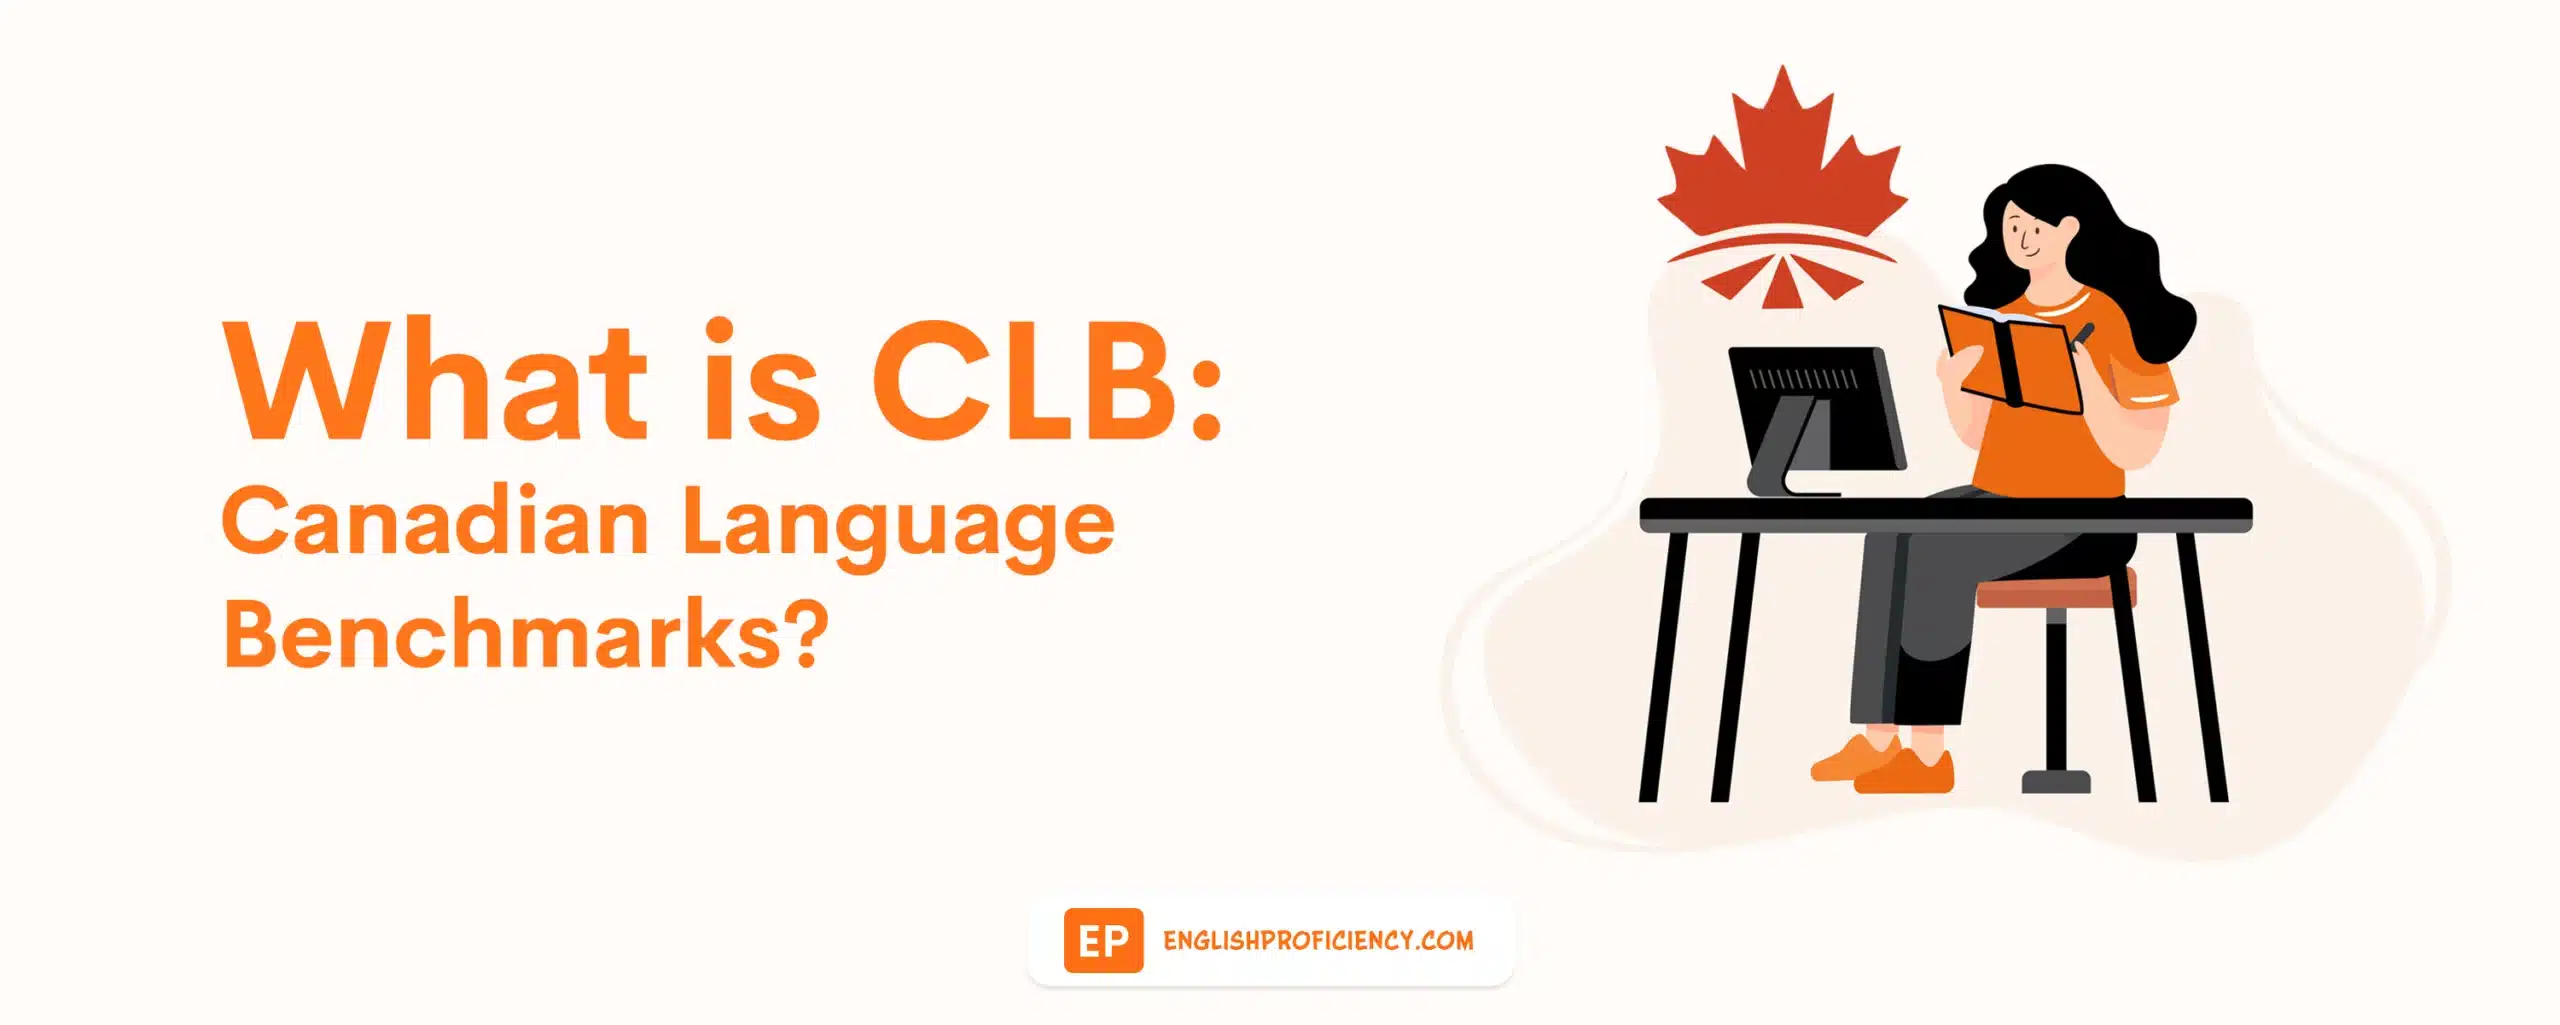 What is CLB Canadian Language Benchmarks